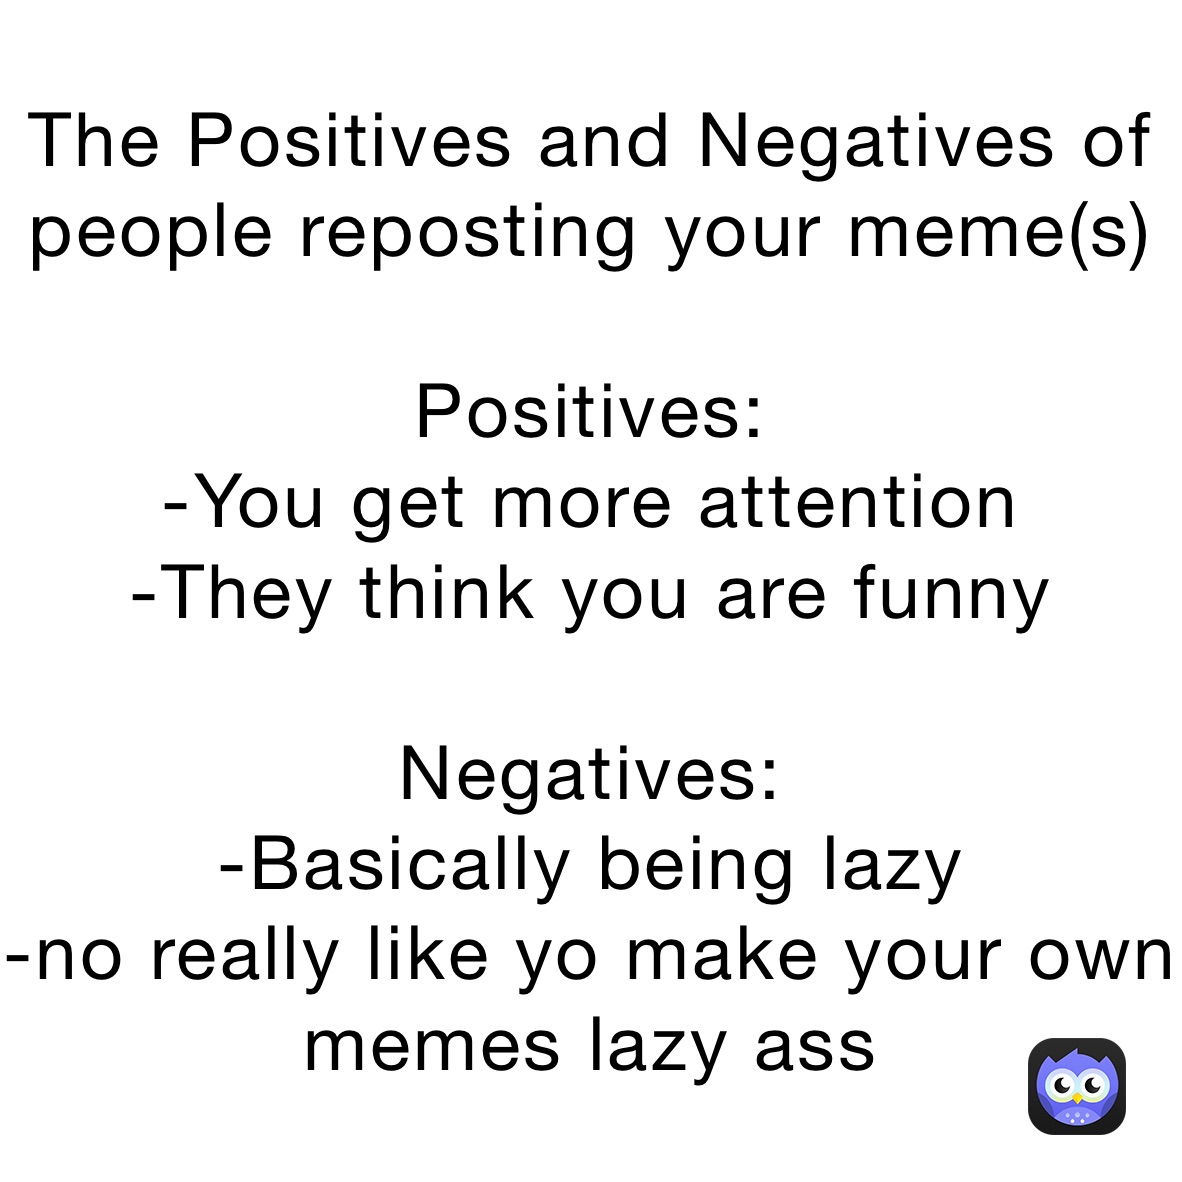 The Positives and Negatives of people reposting your meme(s)

Positives: 
-You get more attention 
-They think you are funny

Negatives:
-Basically being lazy
-no really like yo make your own memes lazy ass 